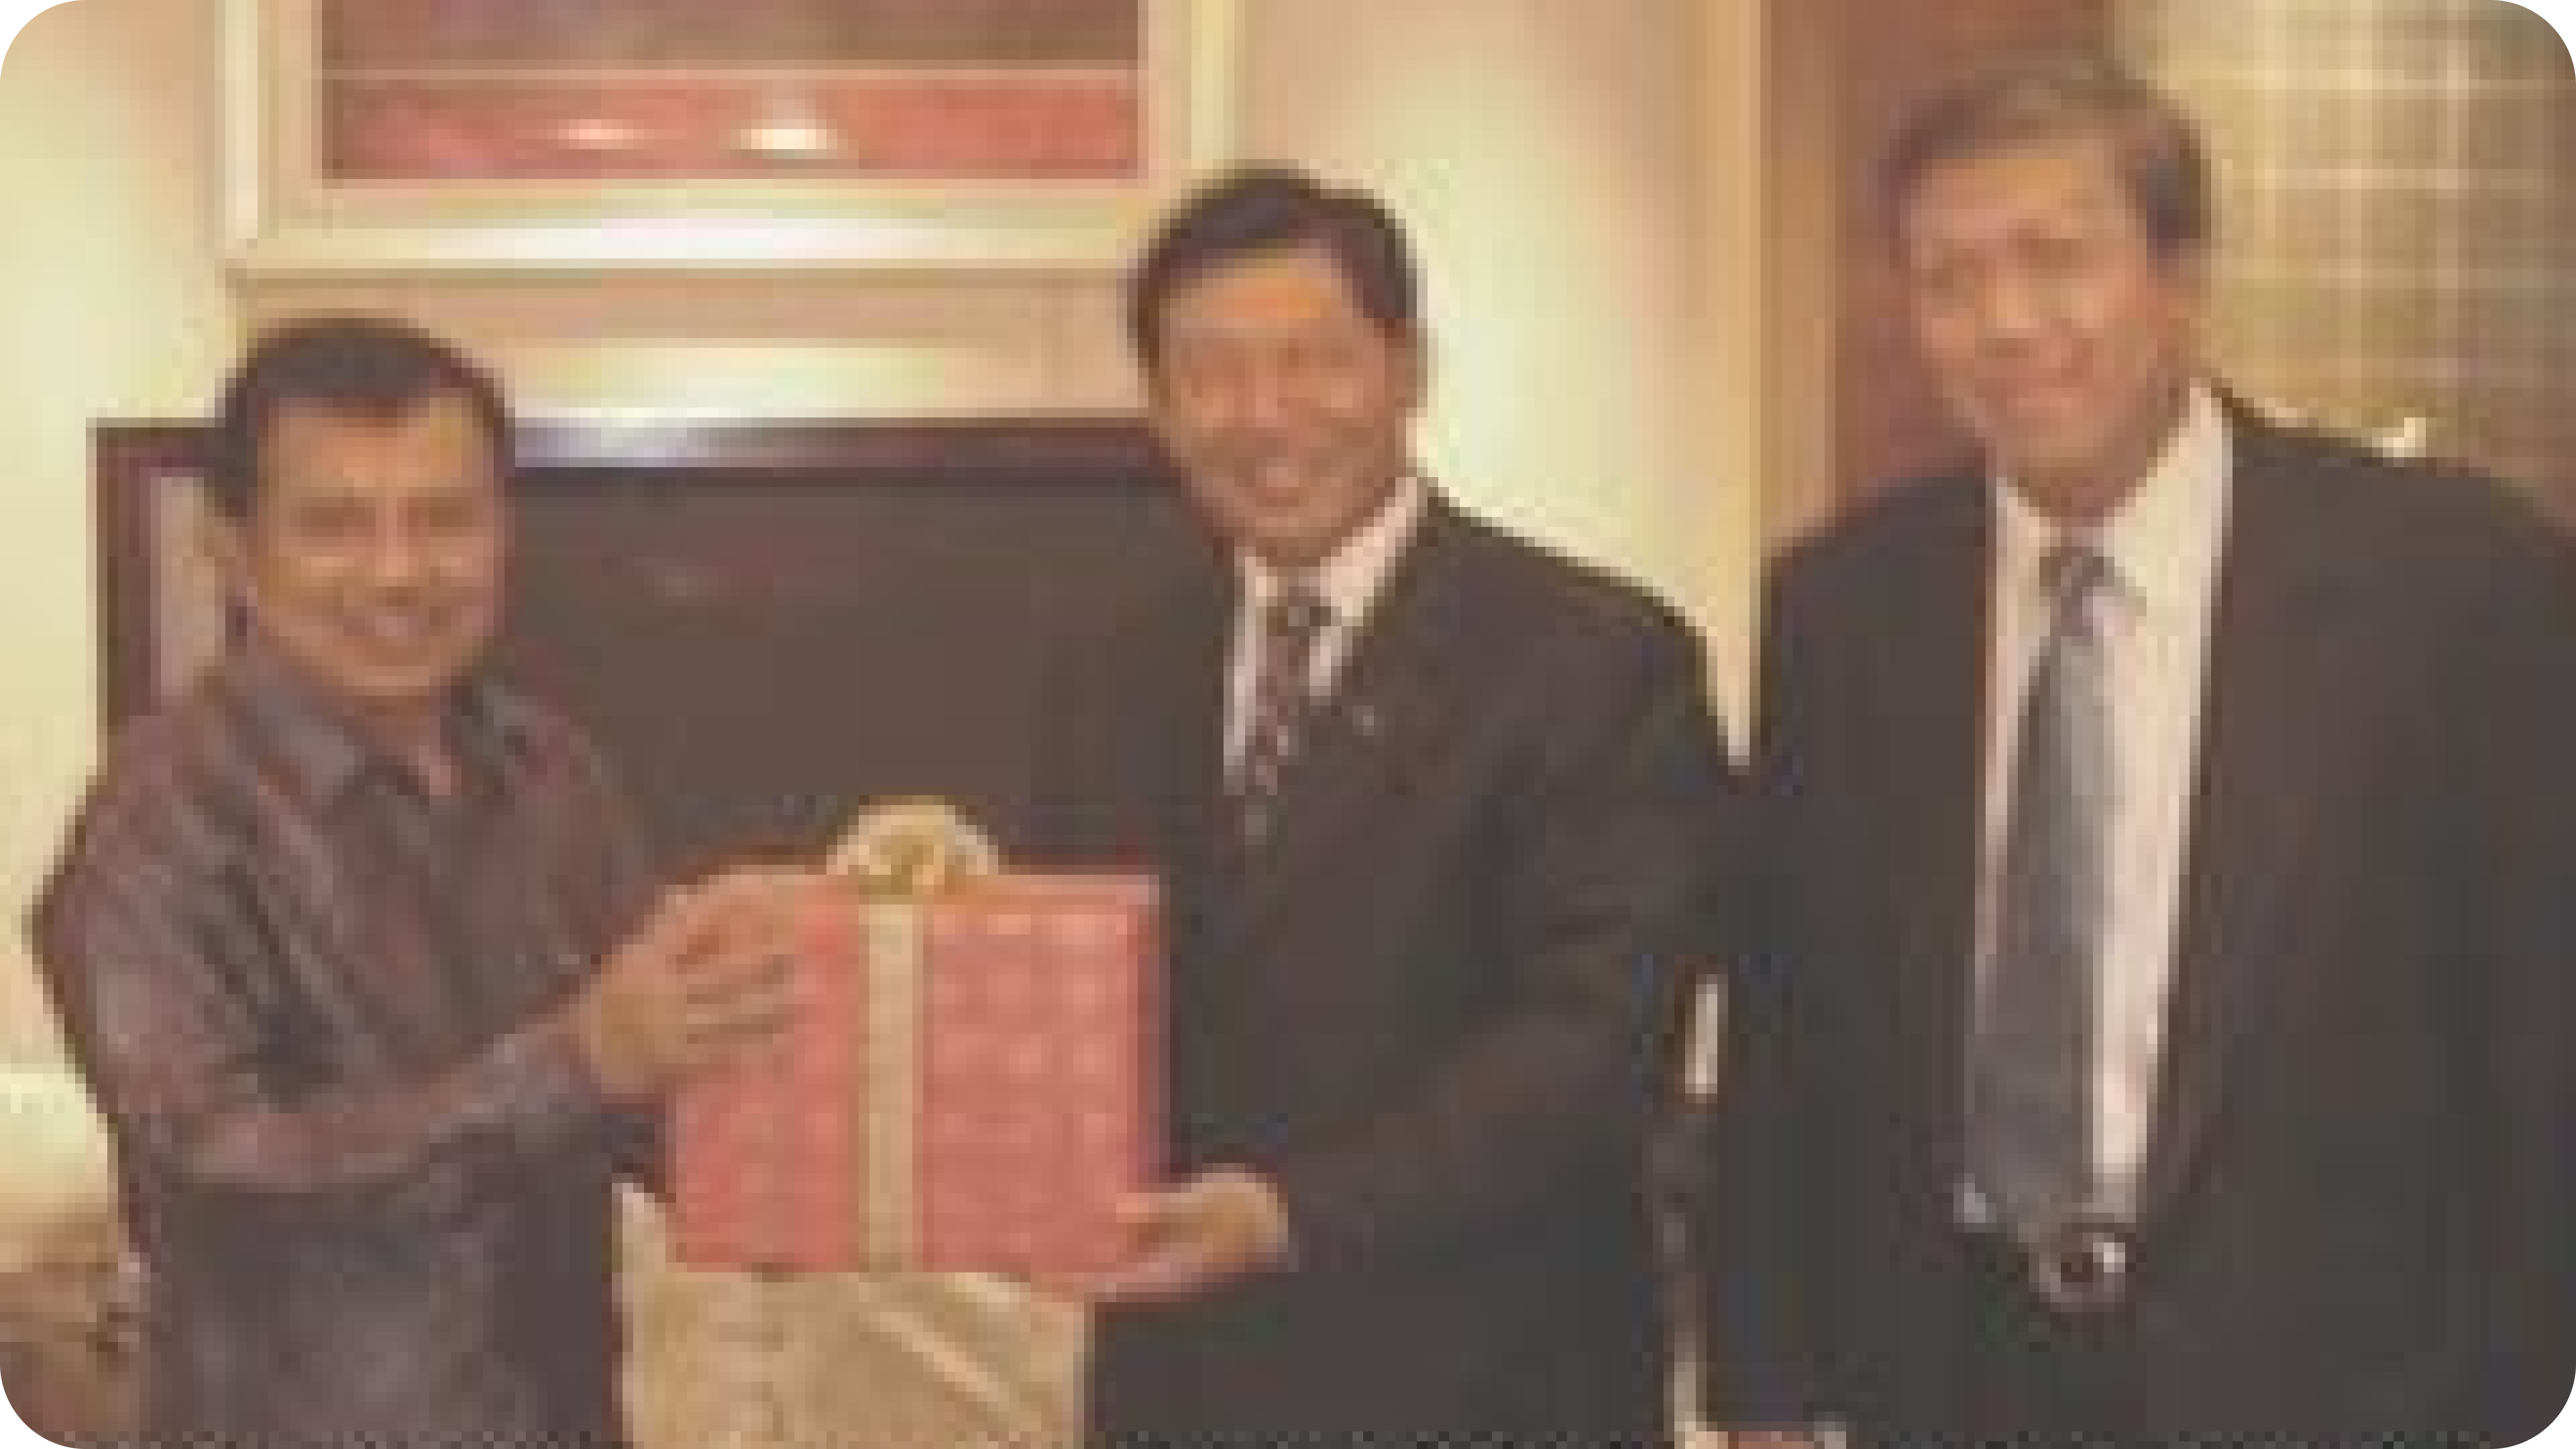 Souvenir presented by CEO of COSCO Group for Vice President of Indonesia